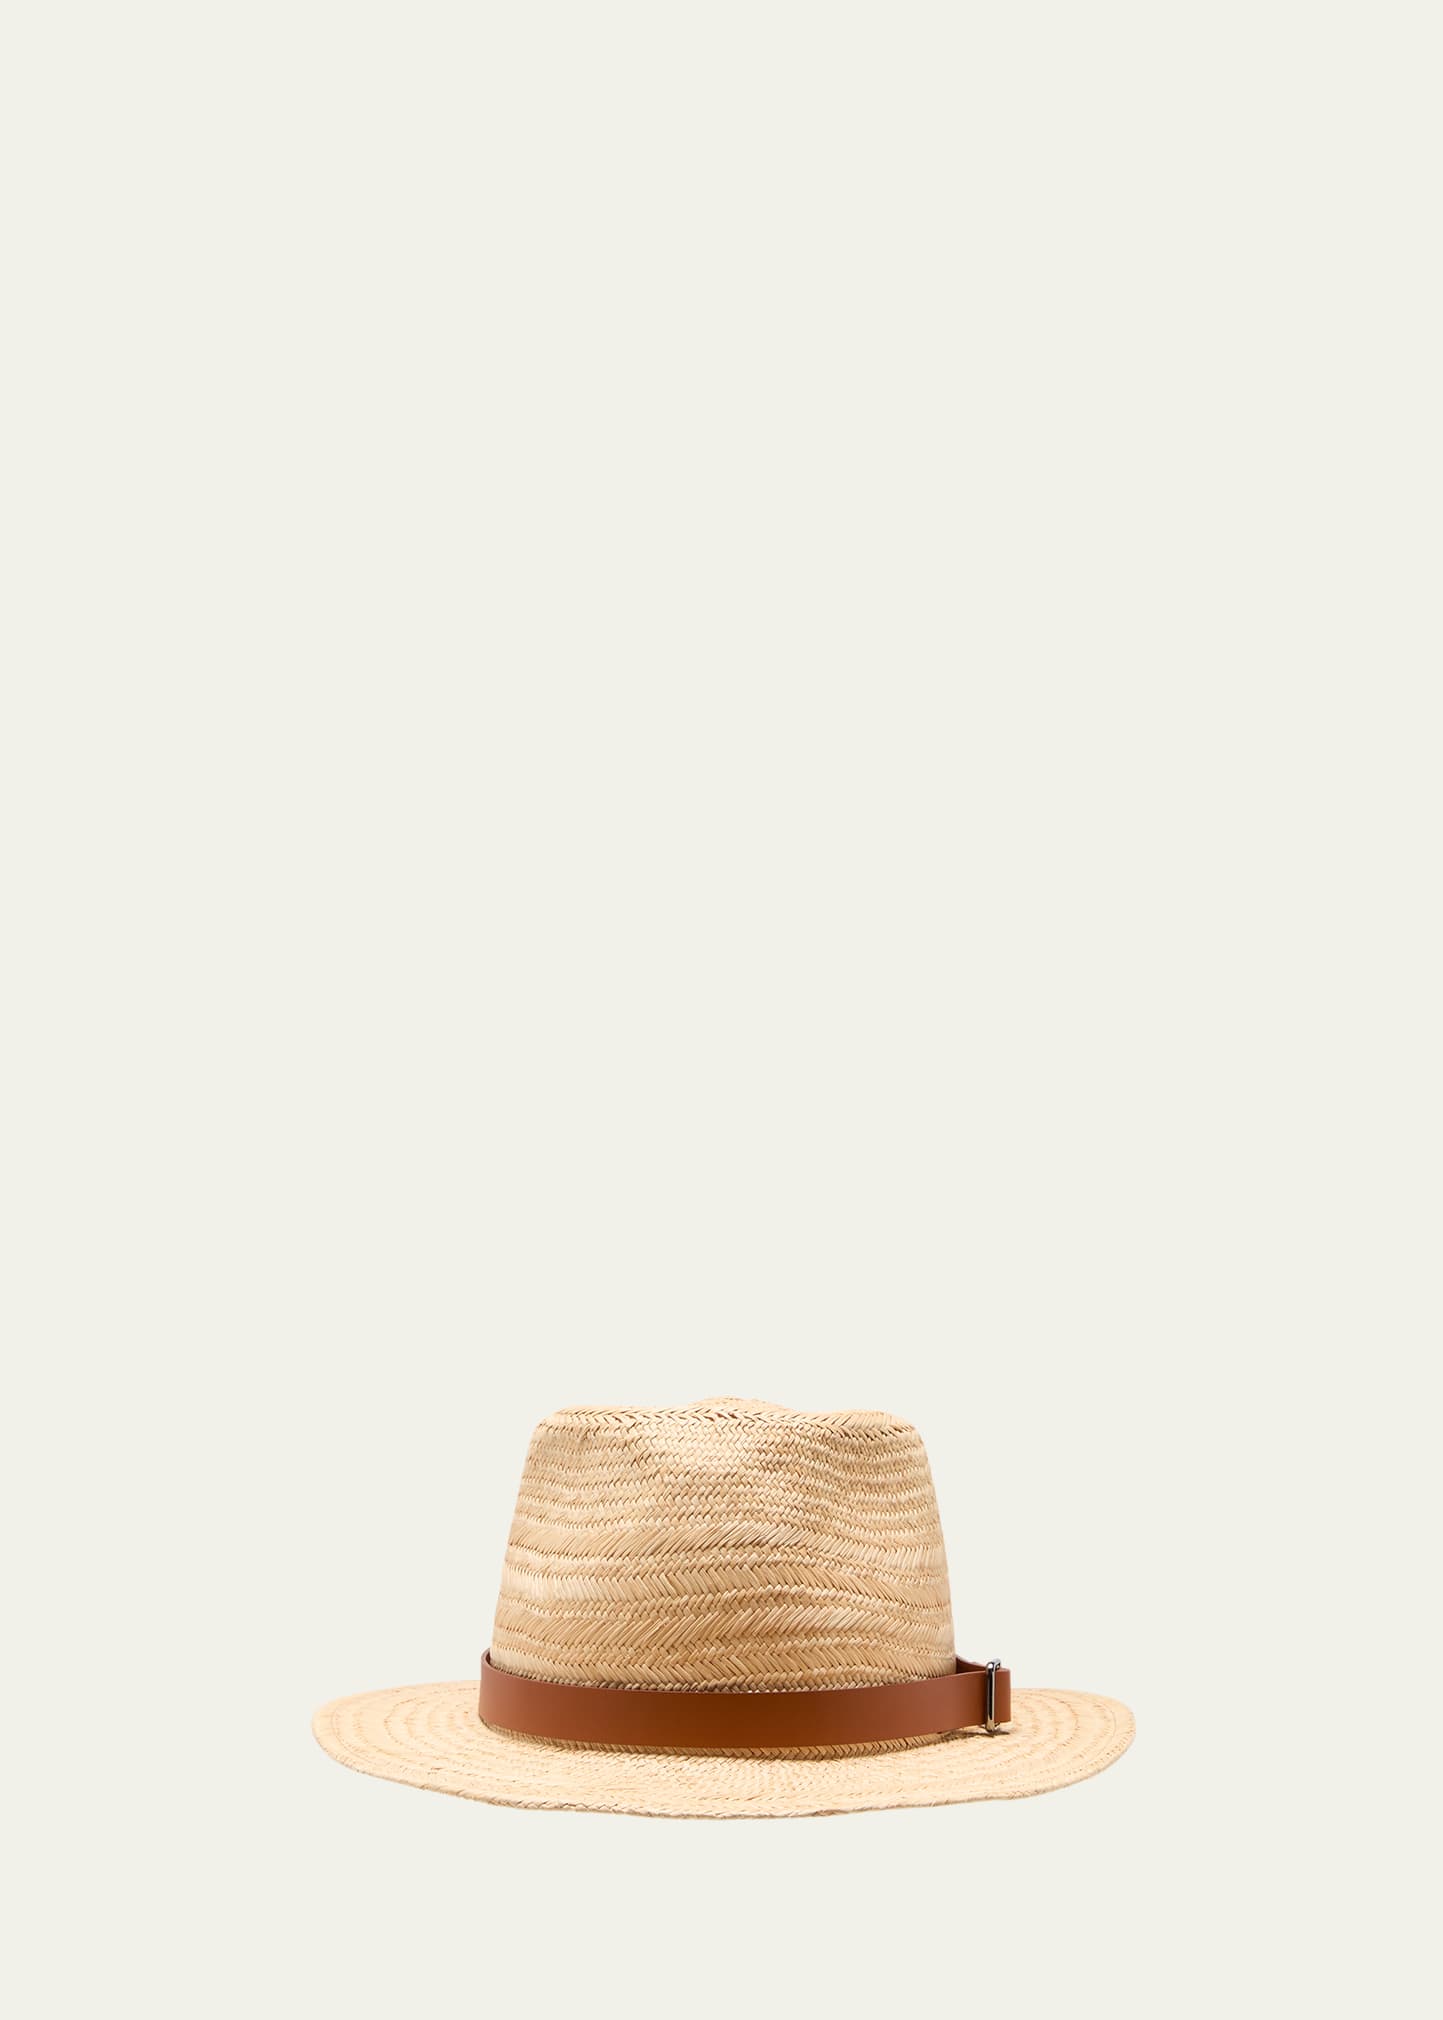 Loro Piana Men's Leather Band Panama Straw Hat In A802 Natural Stra